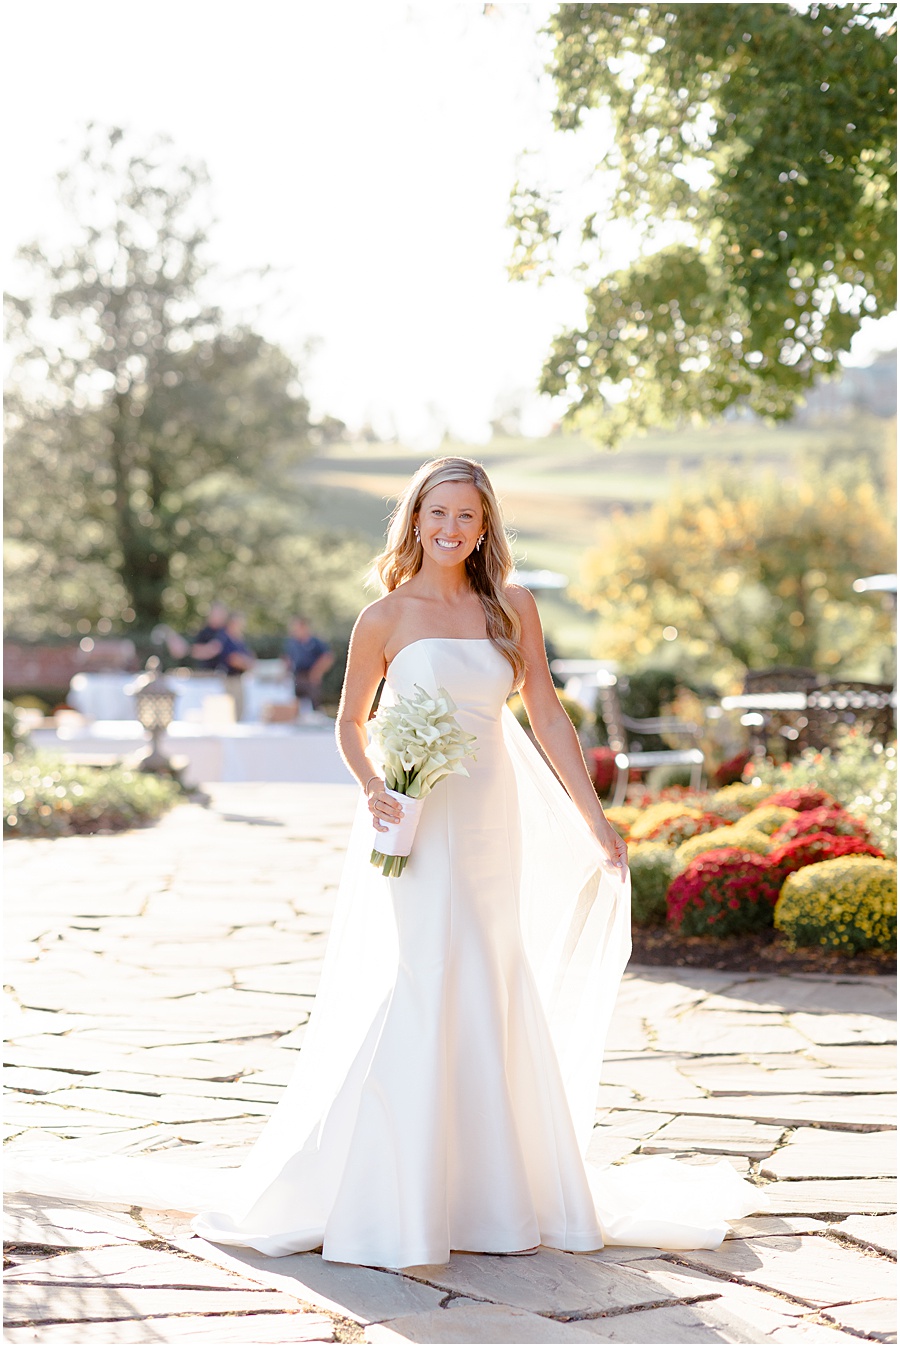 Bridal portrait in historic gardens wearing veil cape holding calle lillies